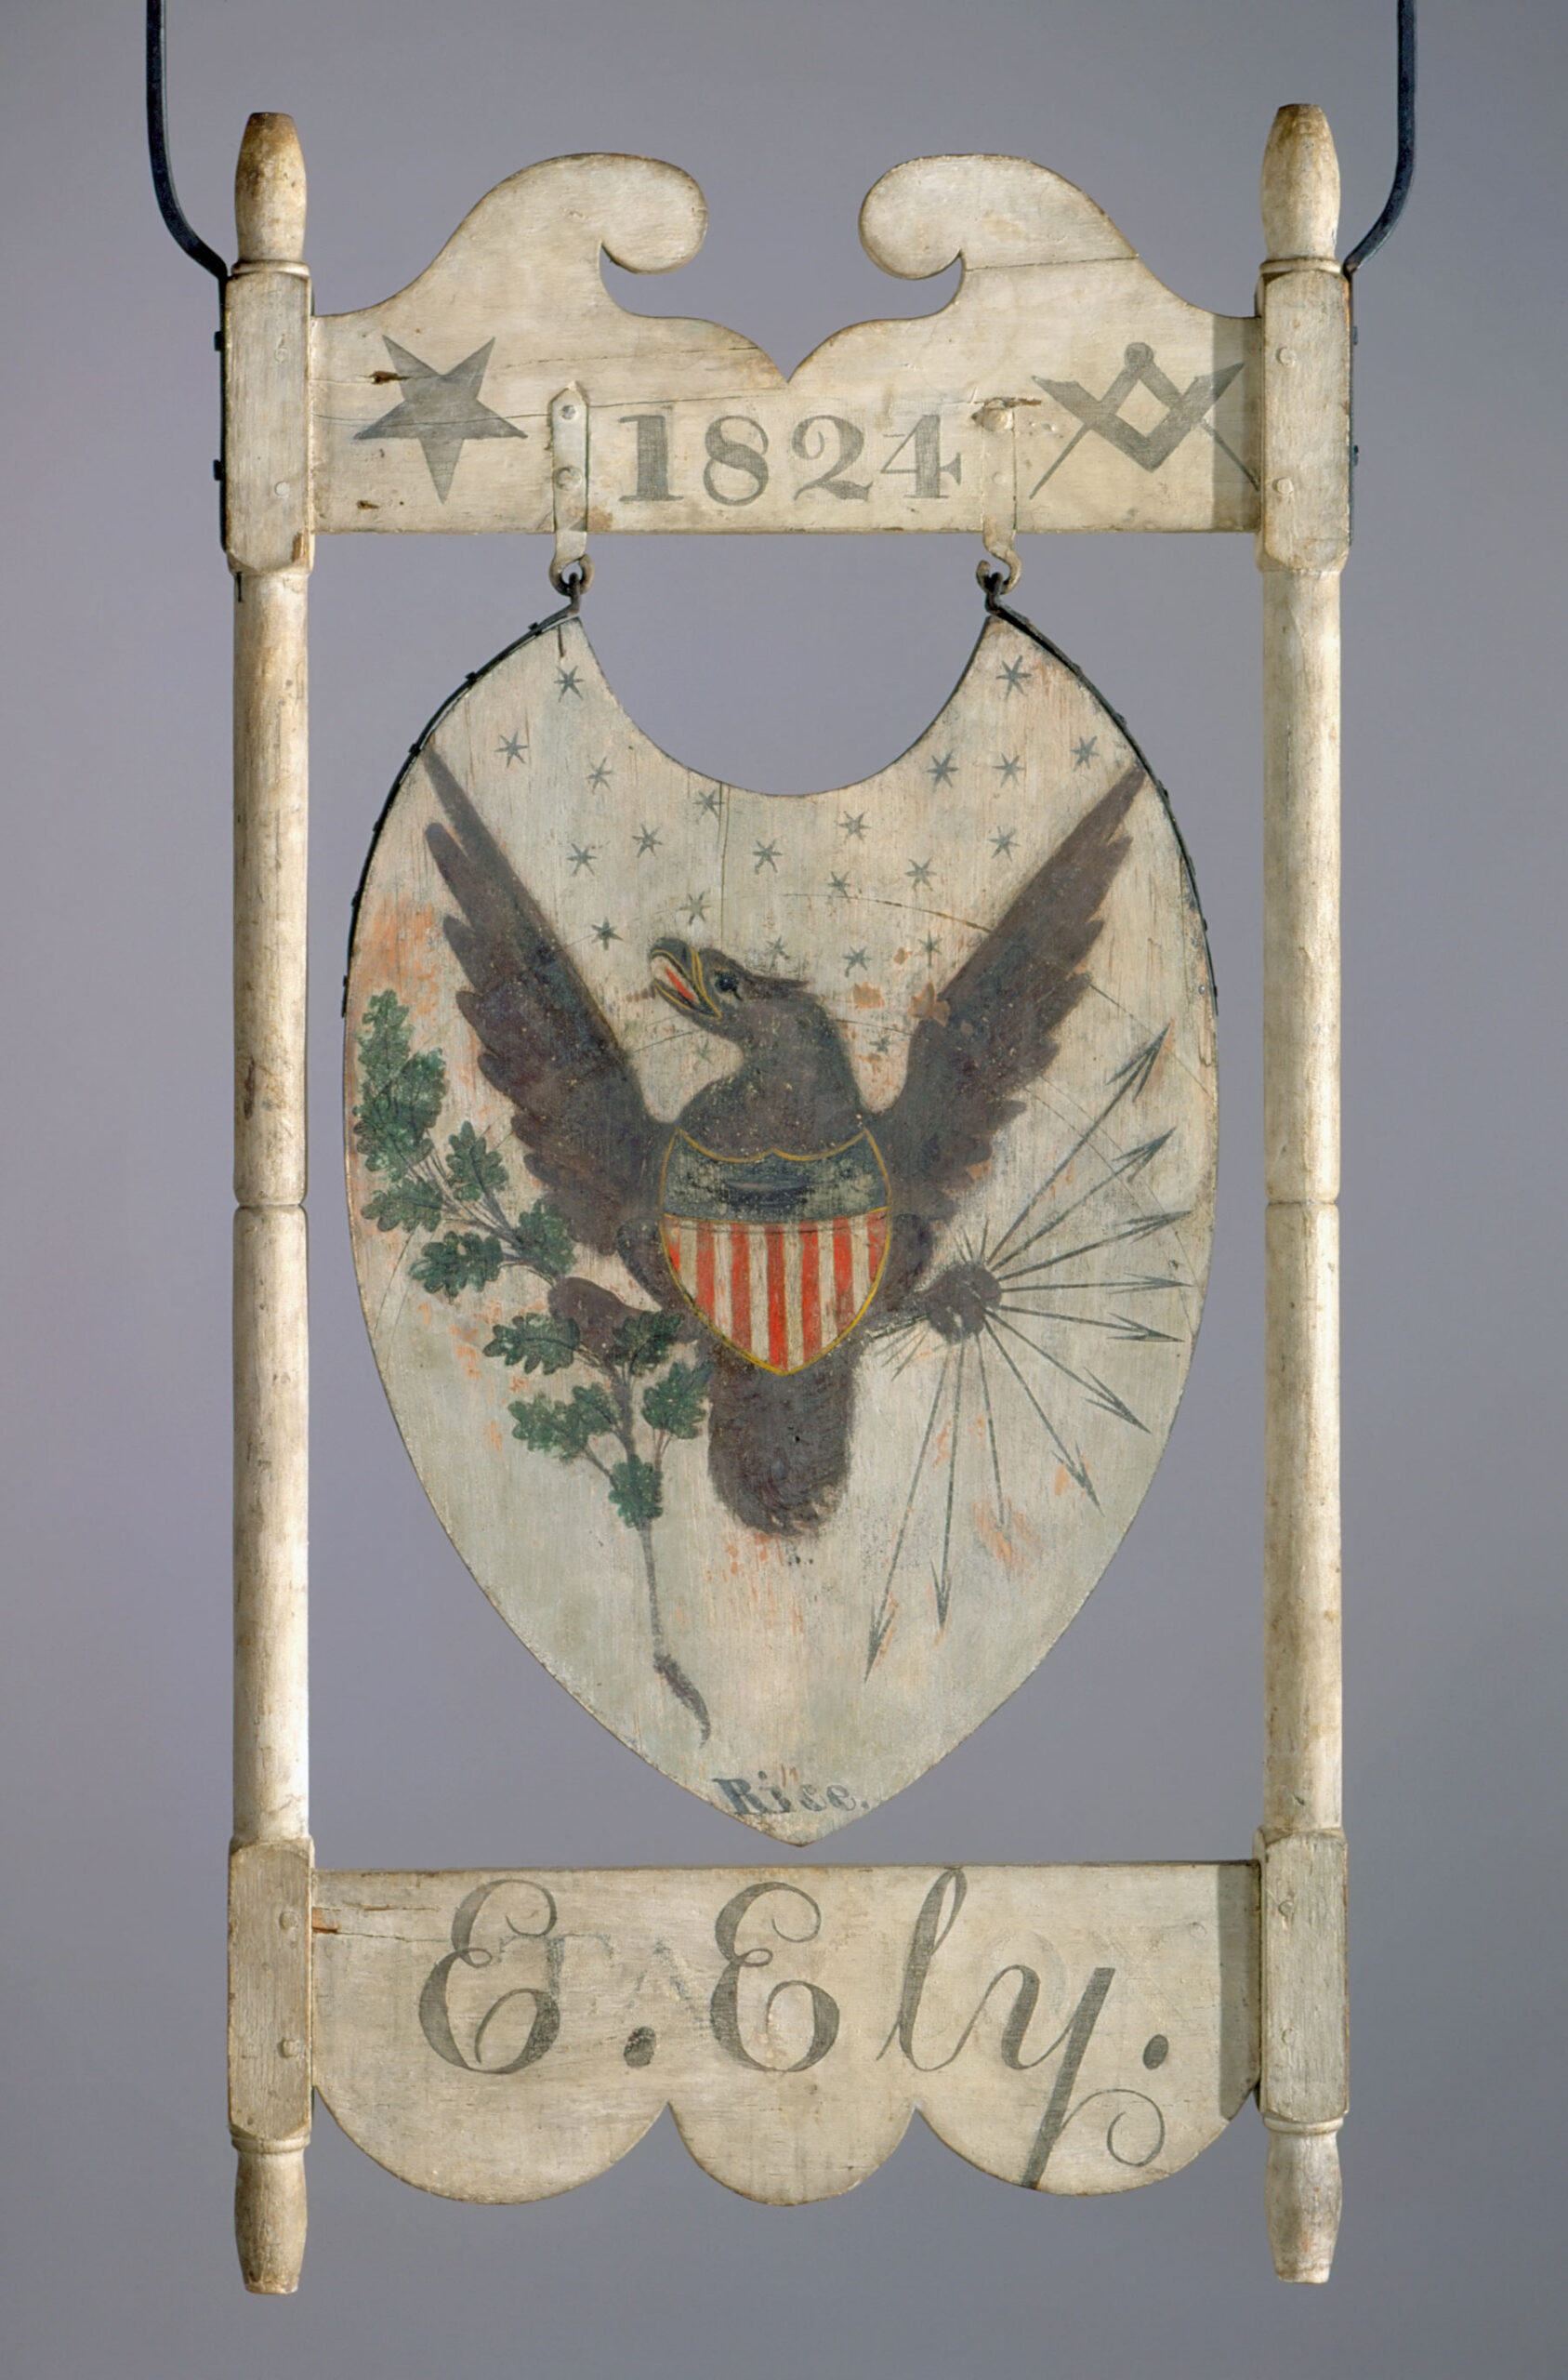 William Rice, sign for the Tarbox Inn, Scantic, Connecticut, dated 1807 and 1824